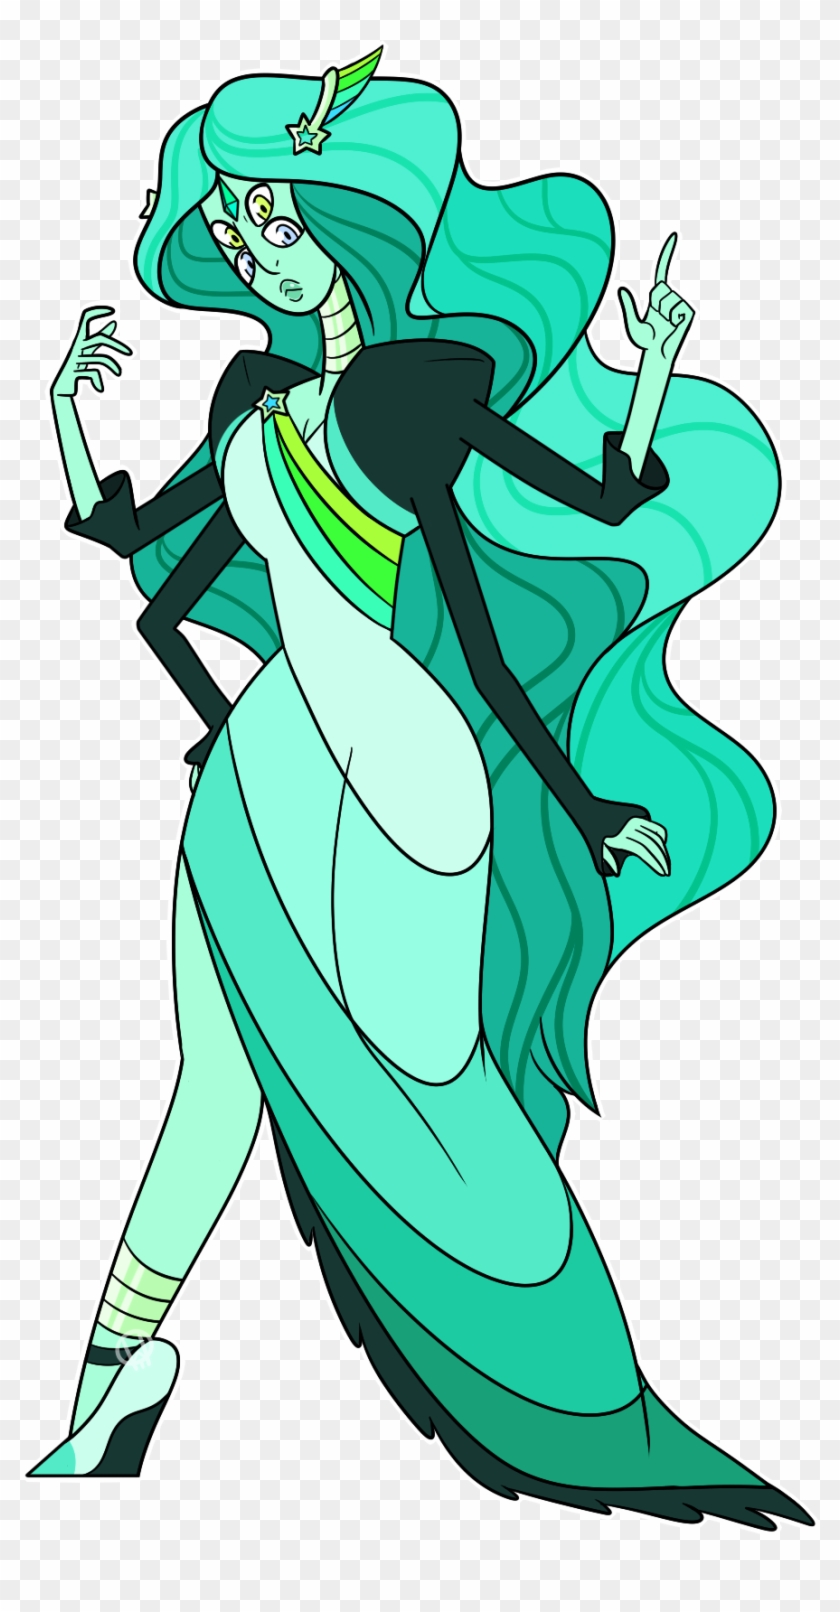 Here's The Prefect Fusion Of Them Together, Their Love - Paraiba Tourmaline Steven Universe #534794